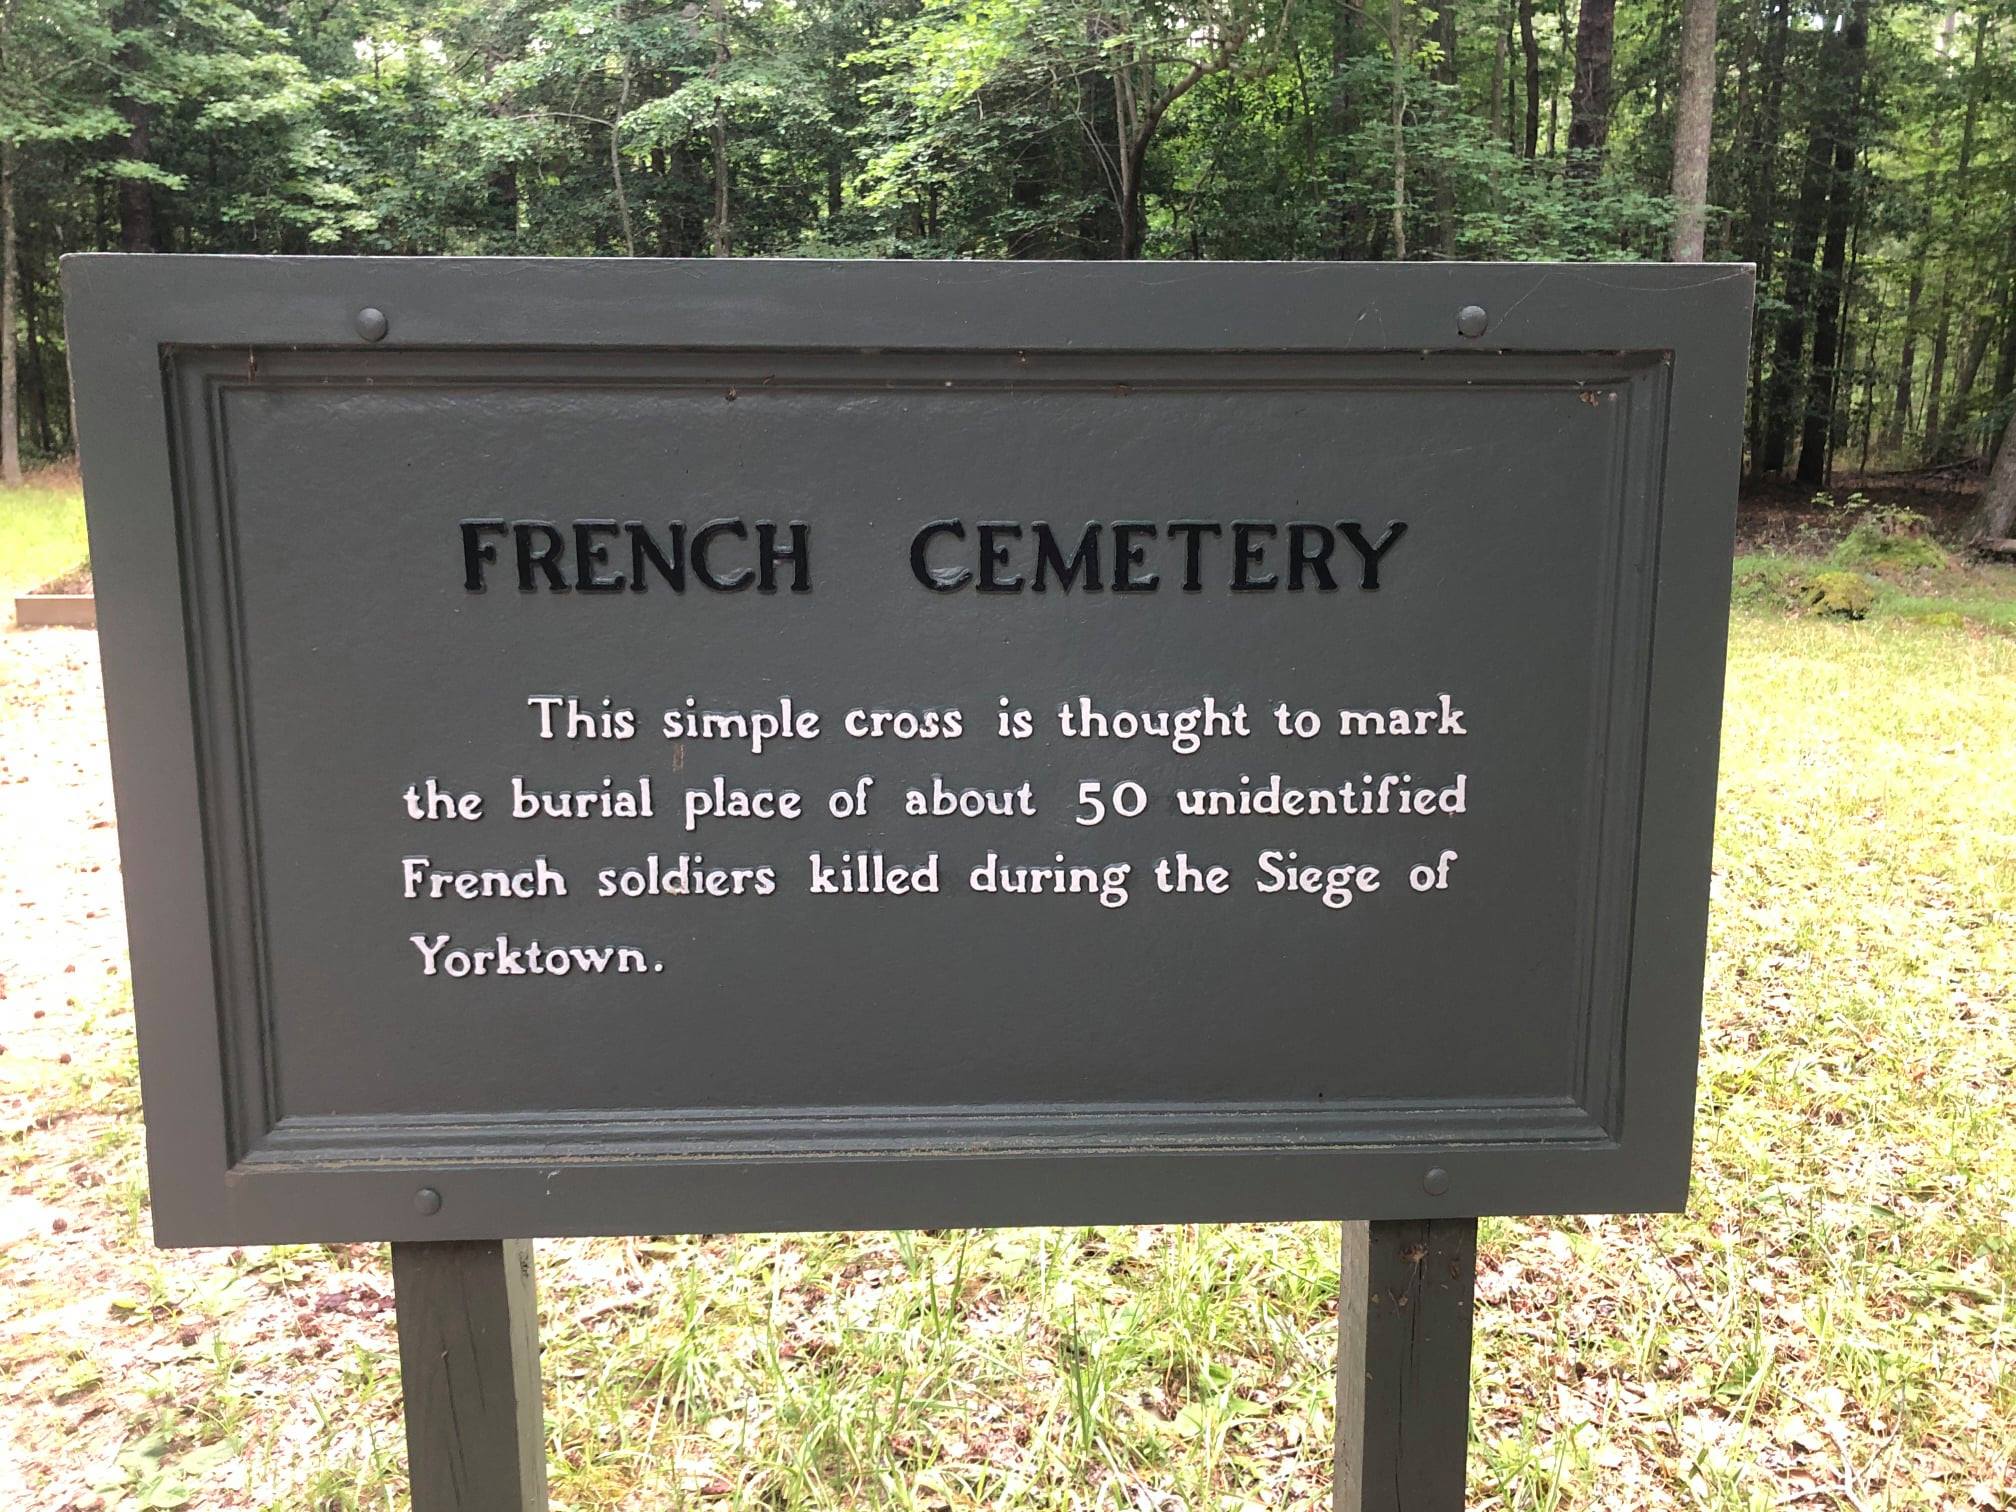 3.Cleanup, French Cemetery-April 10 2021